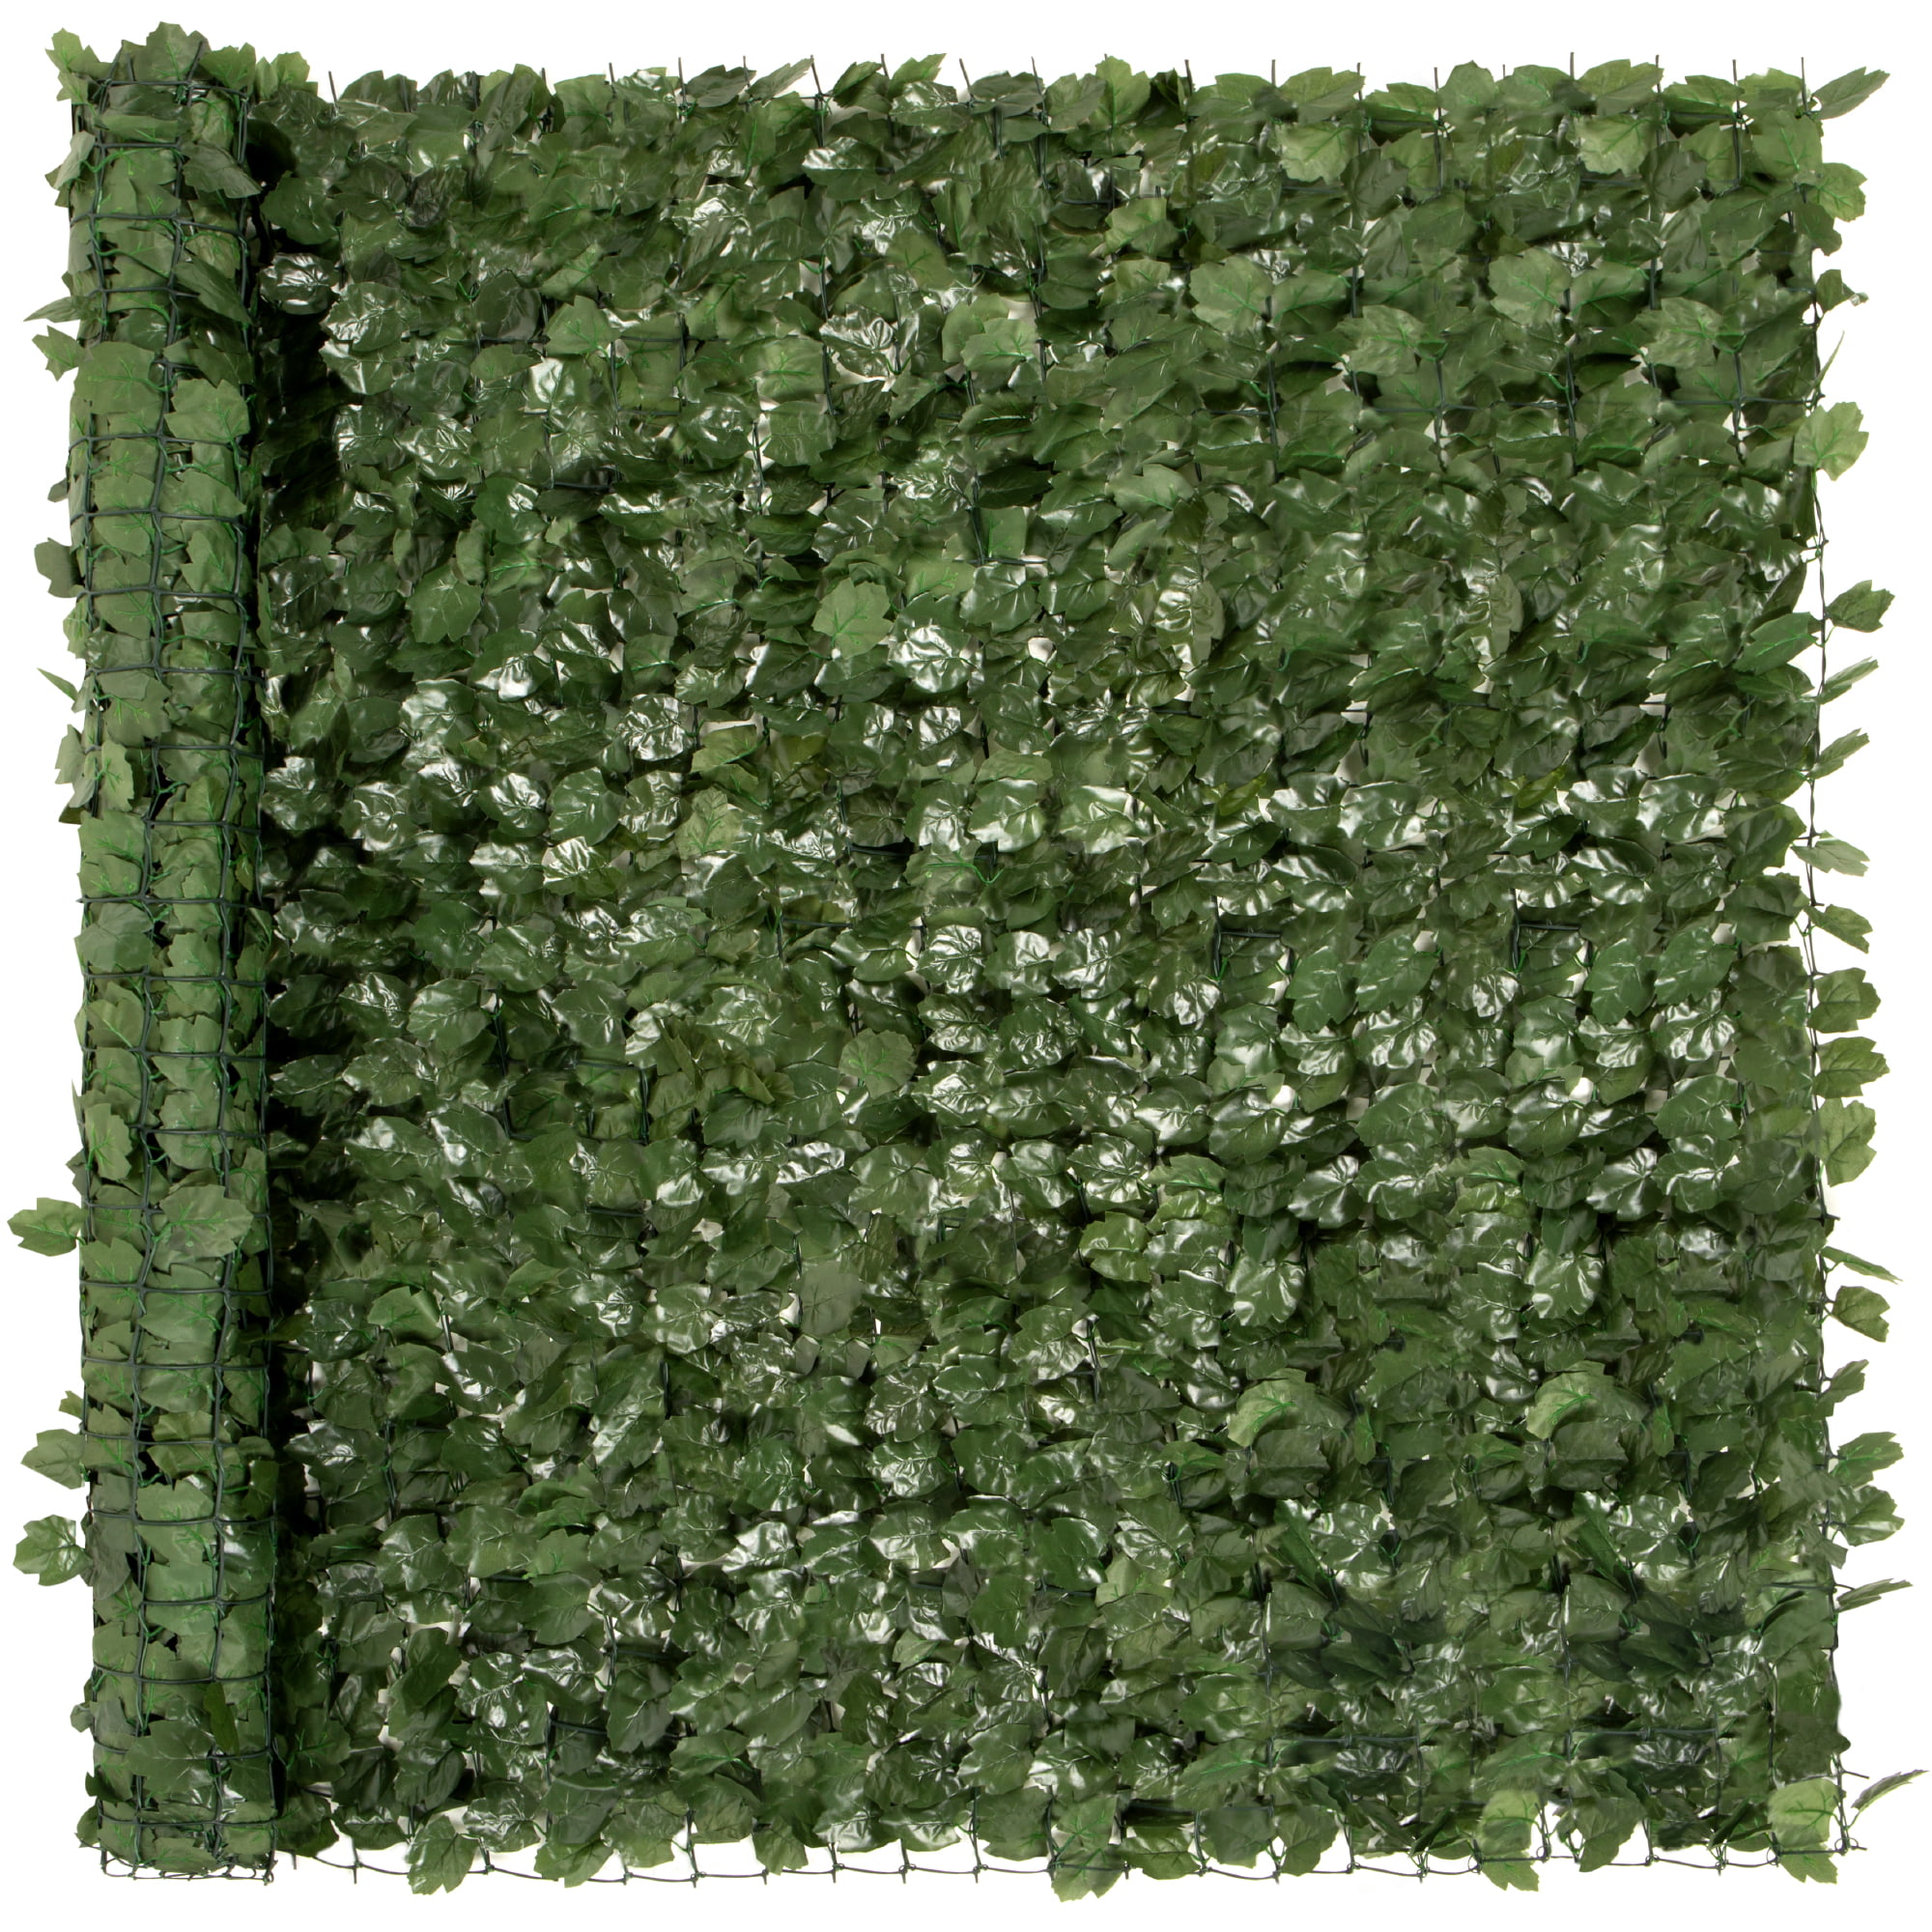 Artificial Ivy Green Leaf Privacy Fence Gate Screen Panels Wall Cover Decoration 